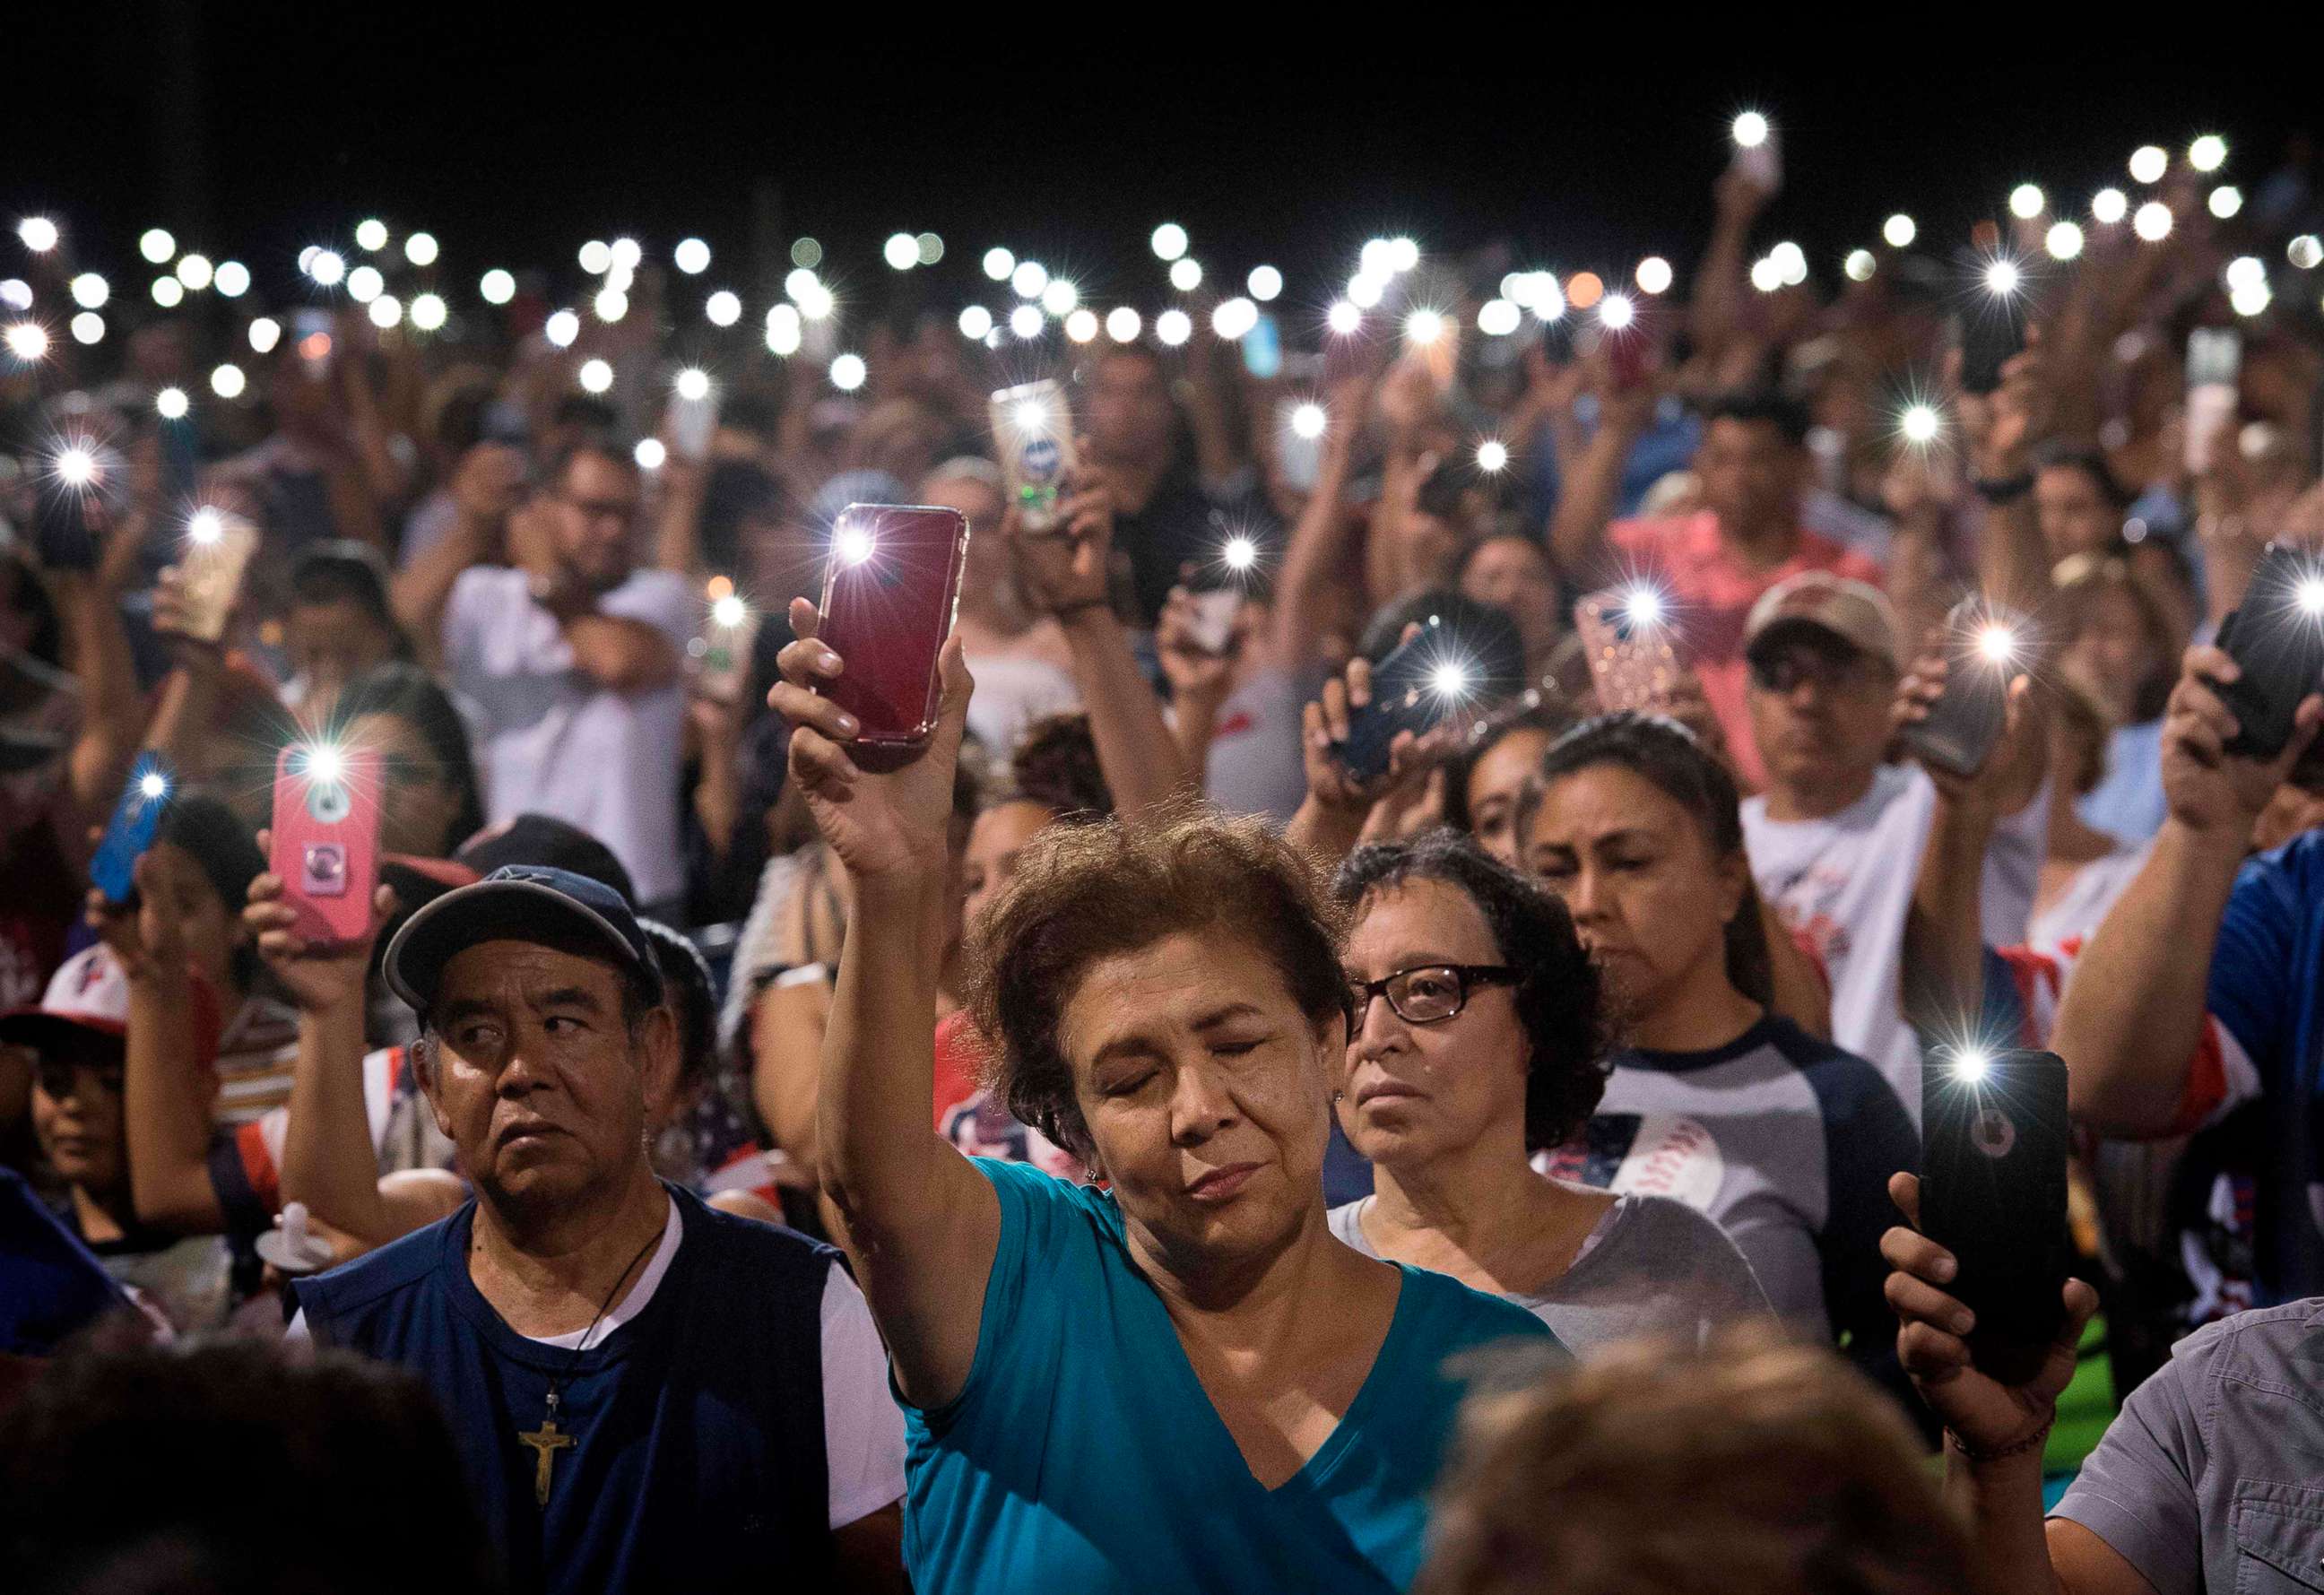 PHOTO: People hold up their phones during a prayer and candle vigil organized by the city, after a shooting at the Cielo Vista Mall Wal-Mart in El Paso, Texas, Aug. 4, 2019.